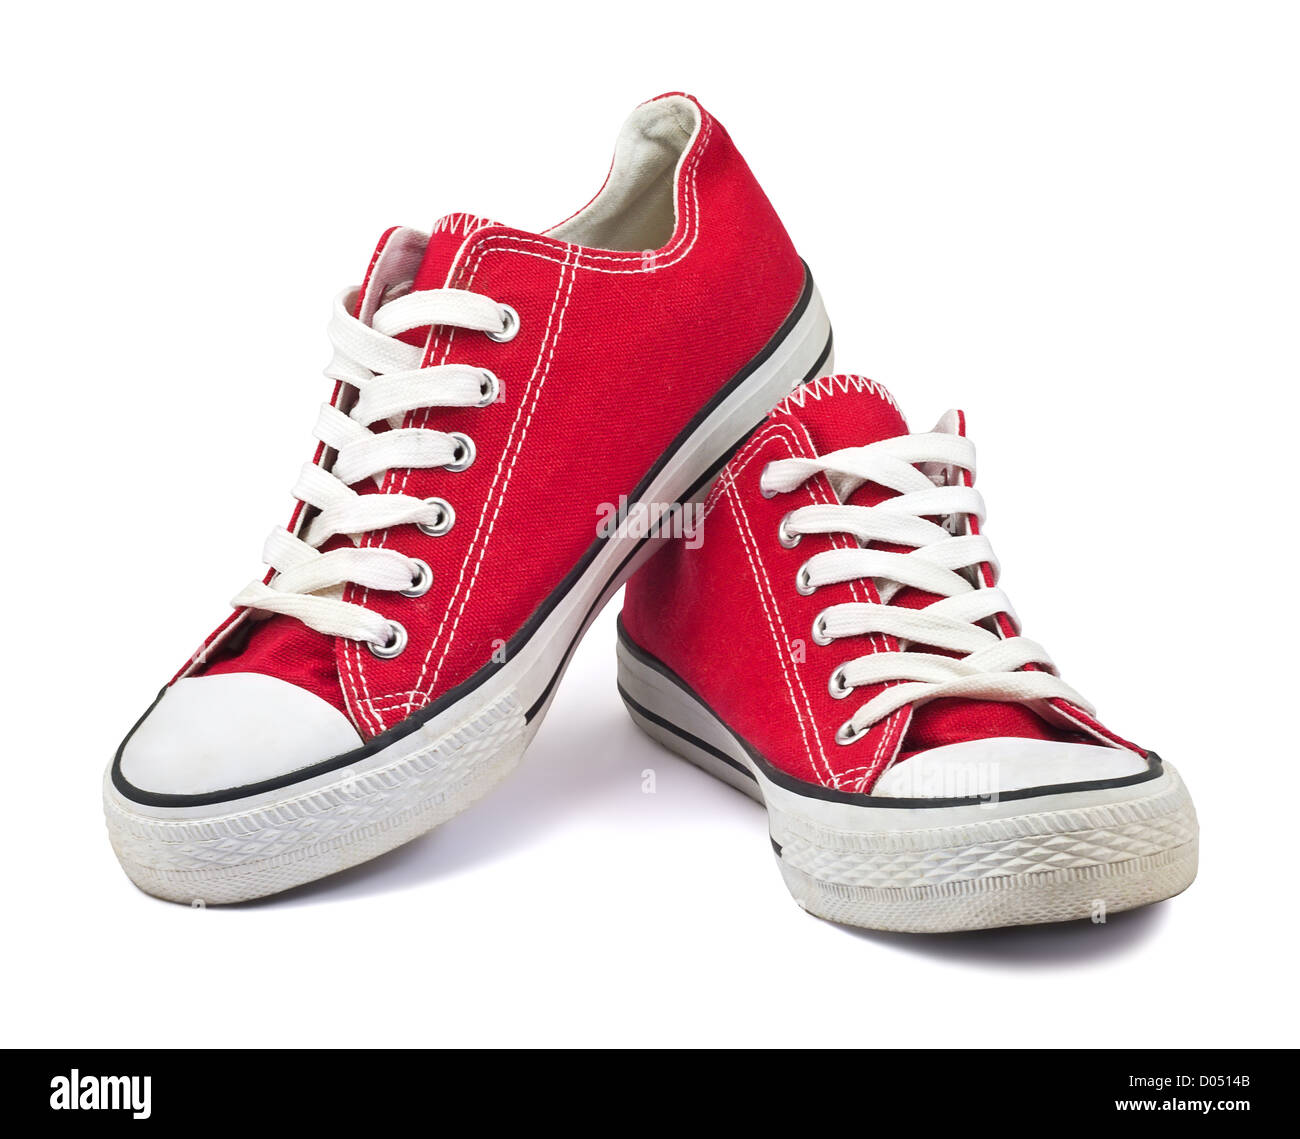 vintage red shoes on white background Stock Photo